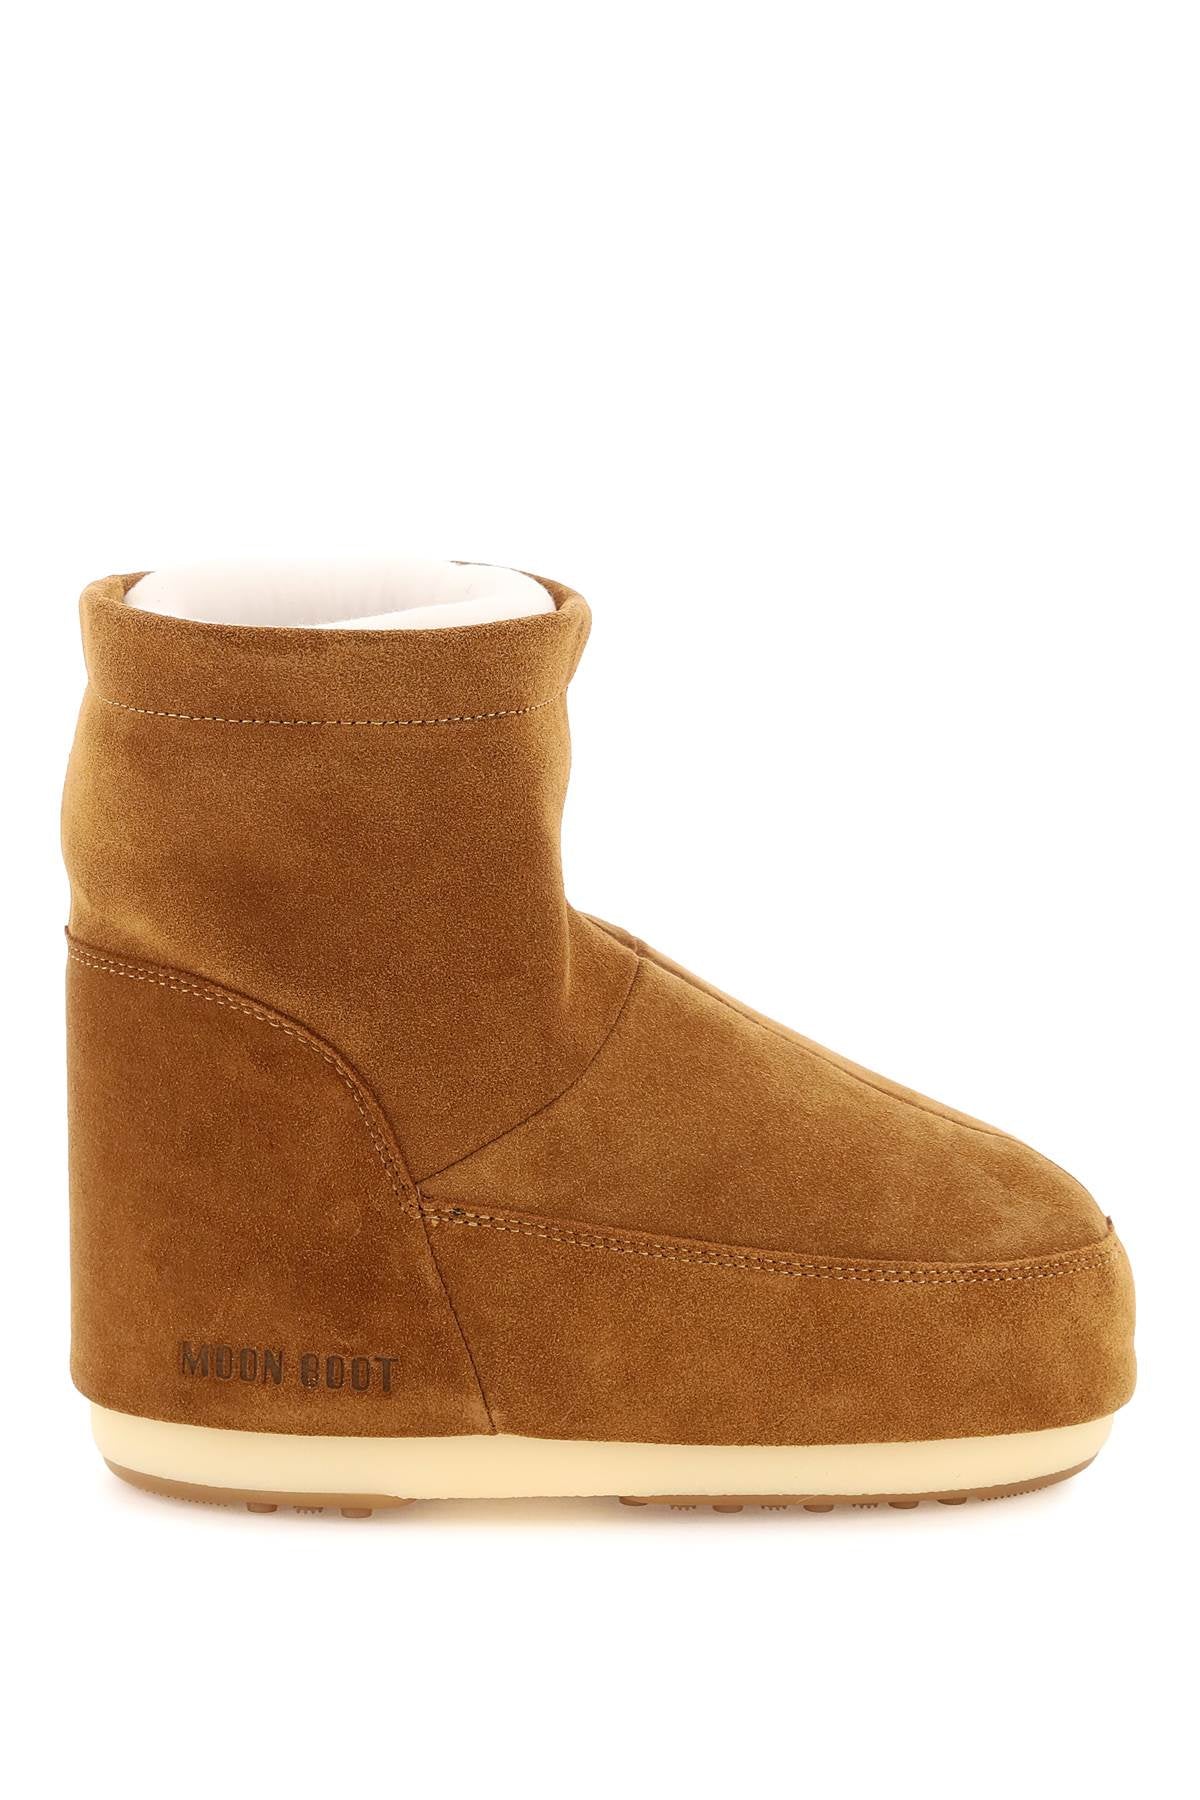 Moon boot icon low suede snow boots-0